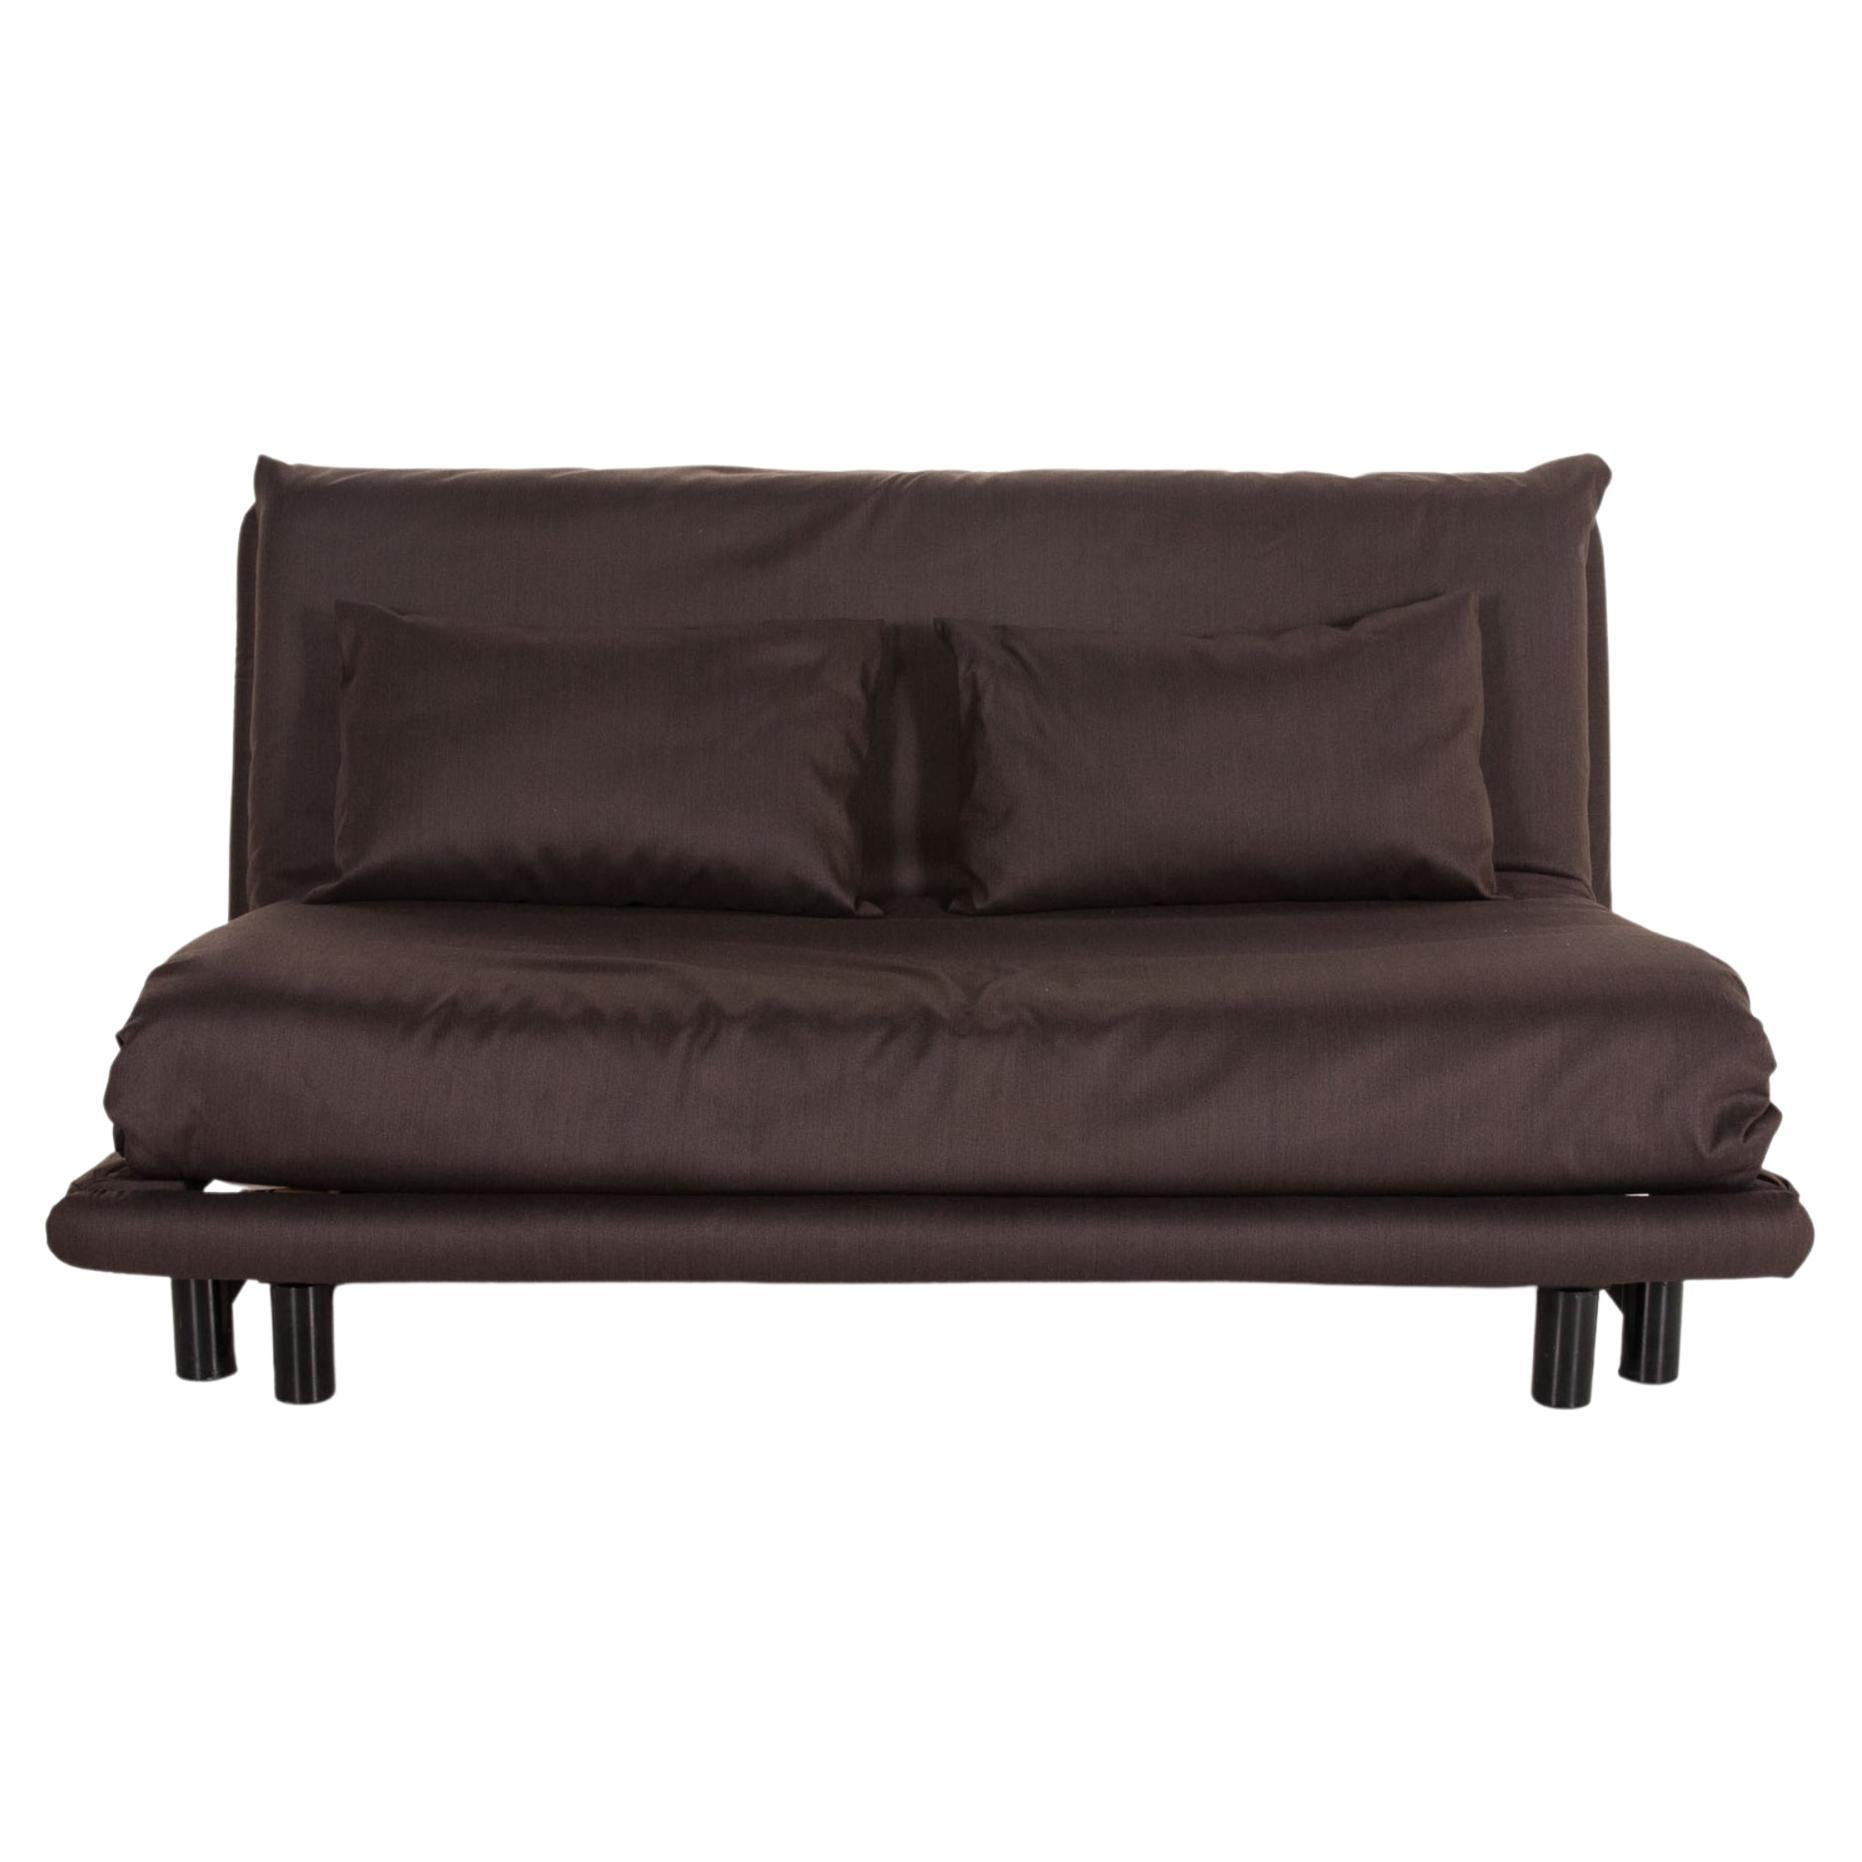 Ligne Roset Multy Fabric Sofa Brown Three-Seater Function Sleeping Function For Sale